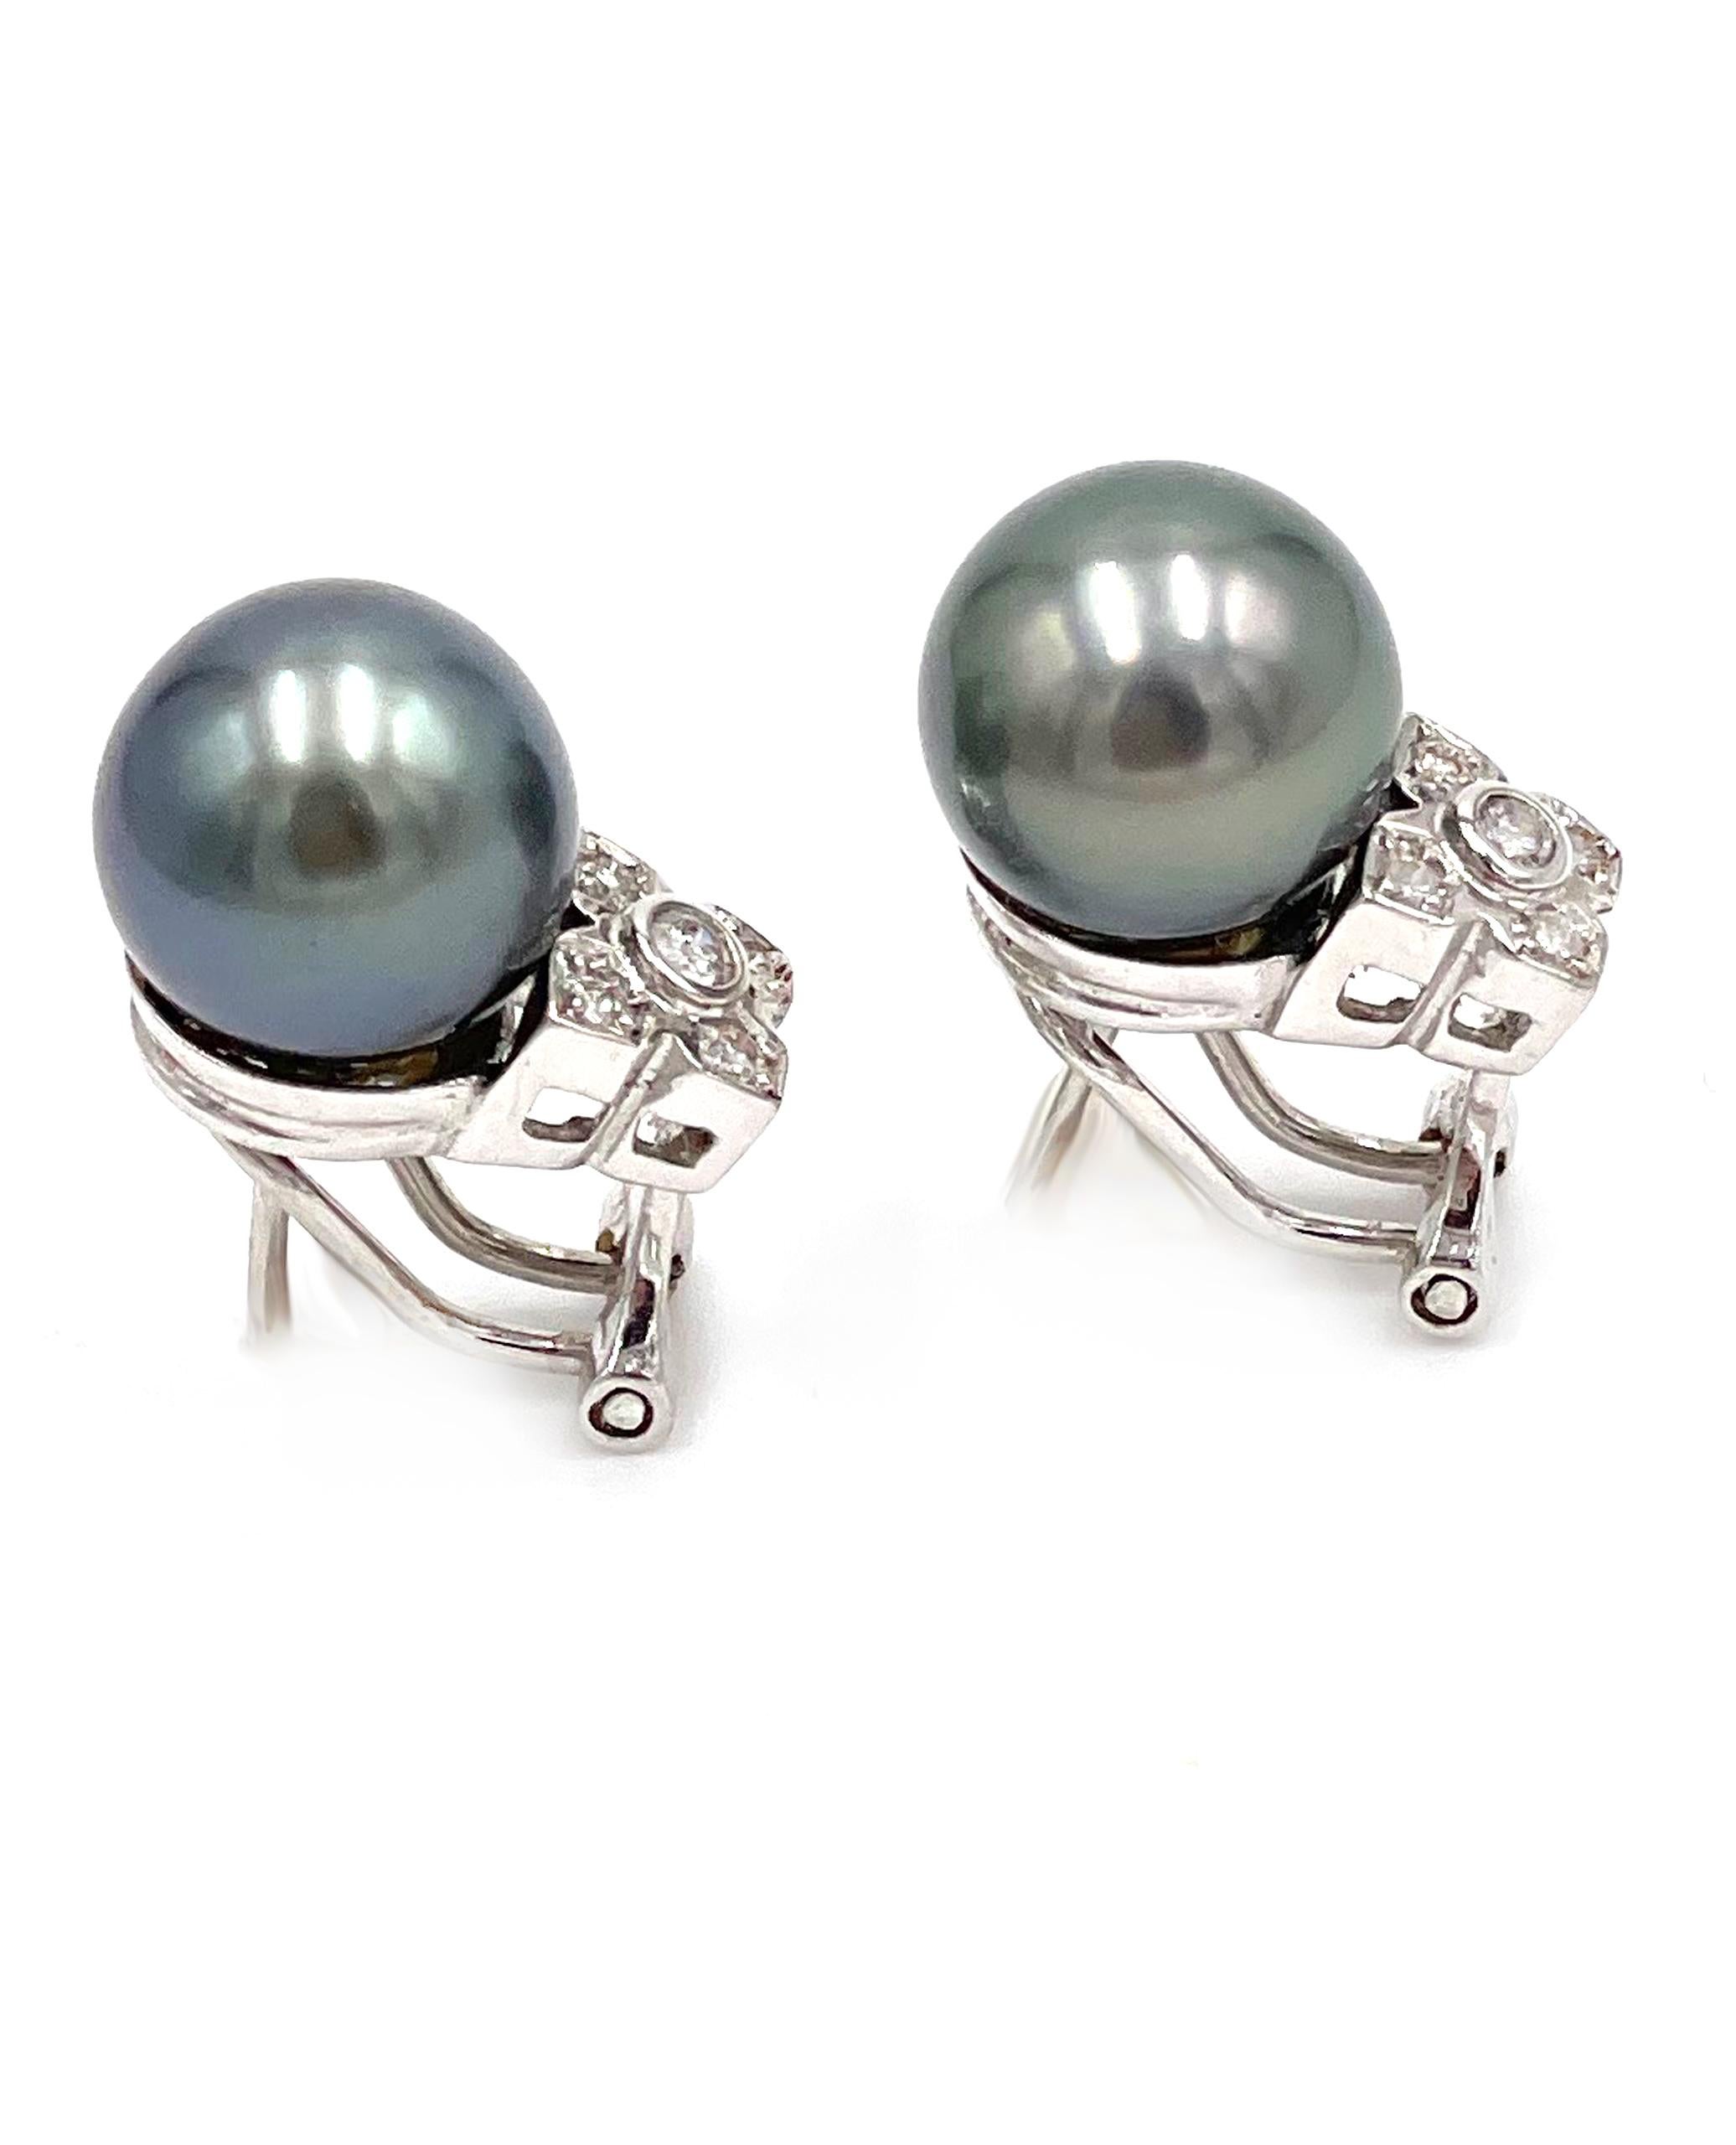 Pre owned pair of 18K white gold Tahitian South Sea pearl earrings with 10 round faceted diamonds weighing approximately 0.15 carats total.

* Omega back closure
* Diamonds are I color, SI2/ISI3 clarity.